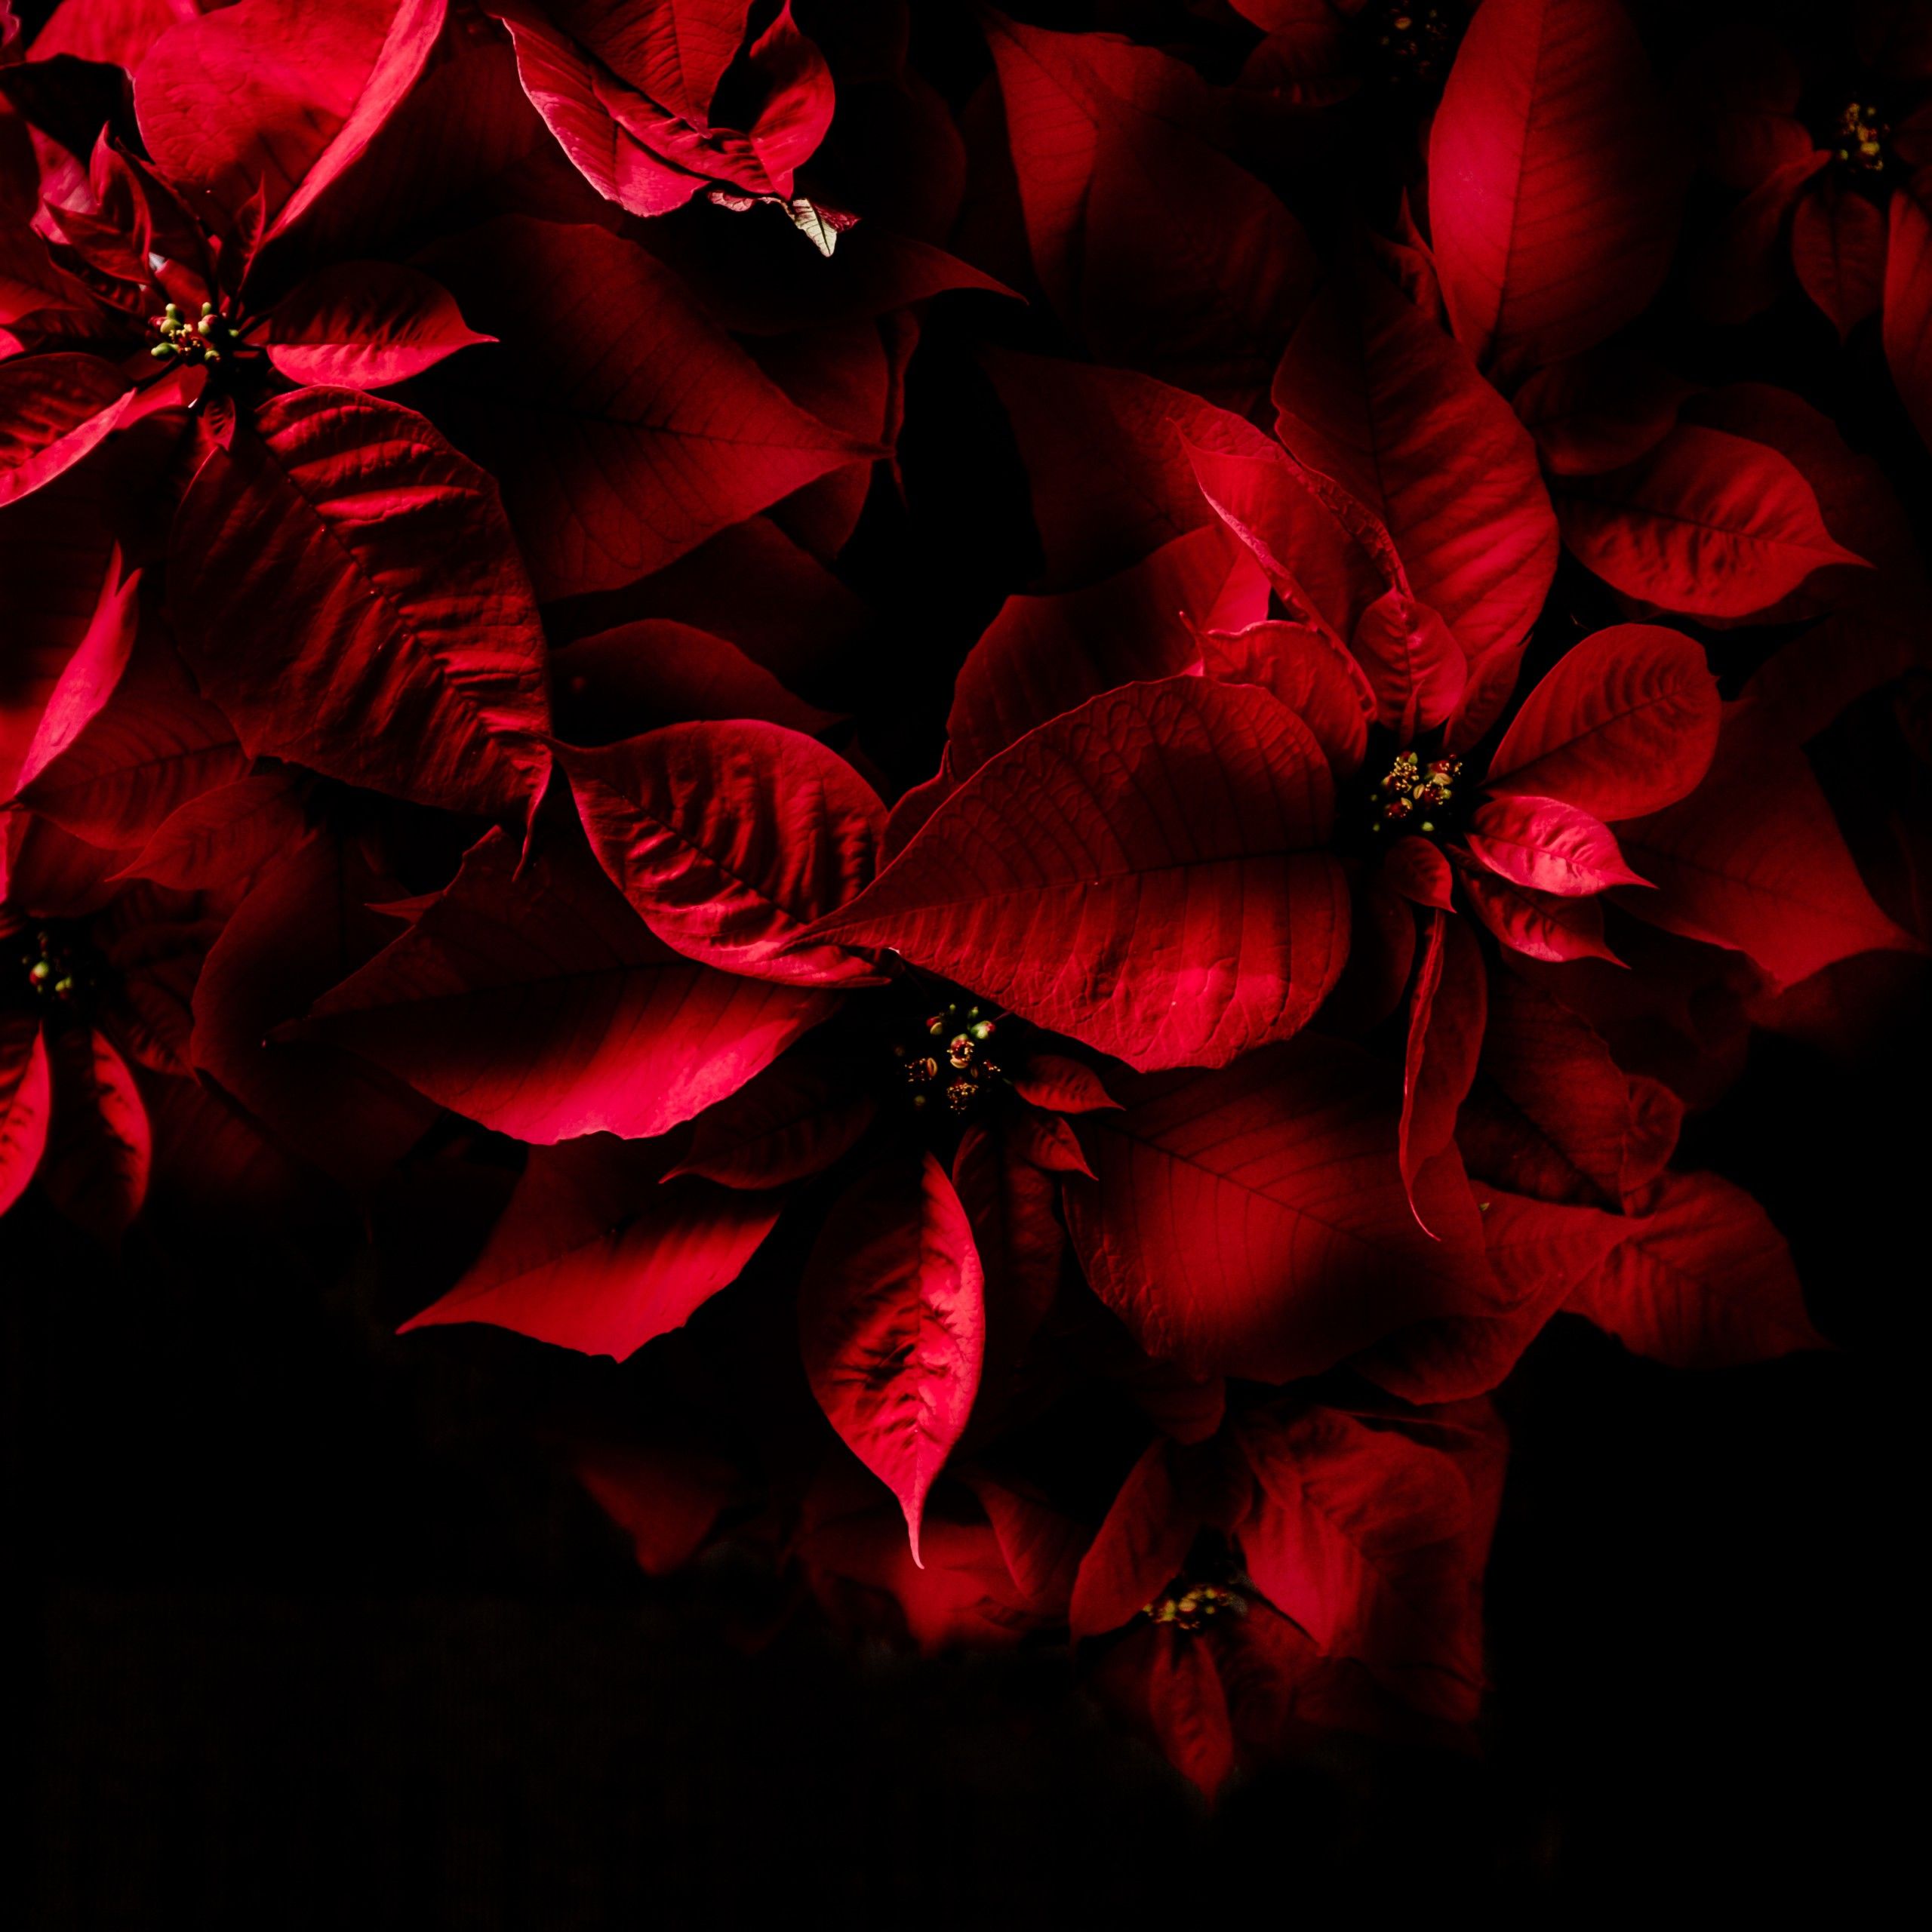 Wallpaper Red leaves, Dark, AMOLED, 4K, Flowers,. Wallpaper for iPhone, Android, Mobile and Desktop